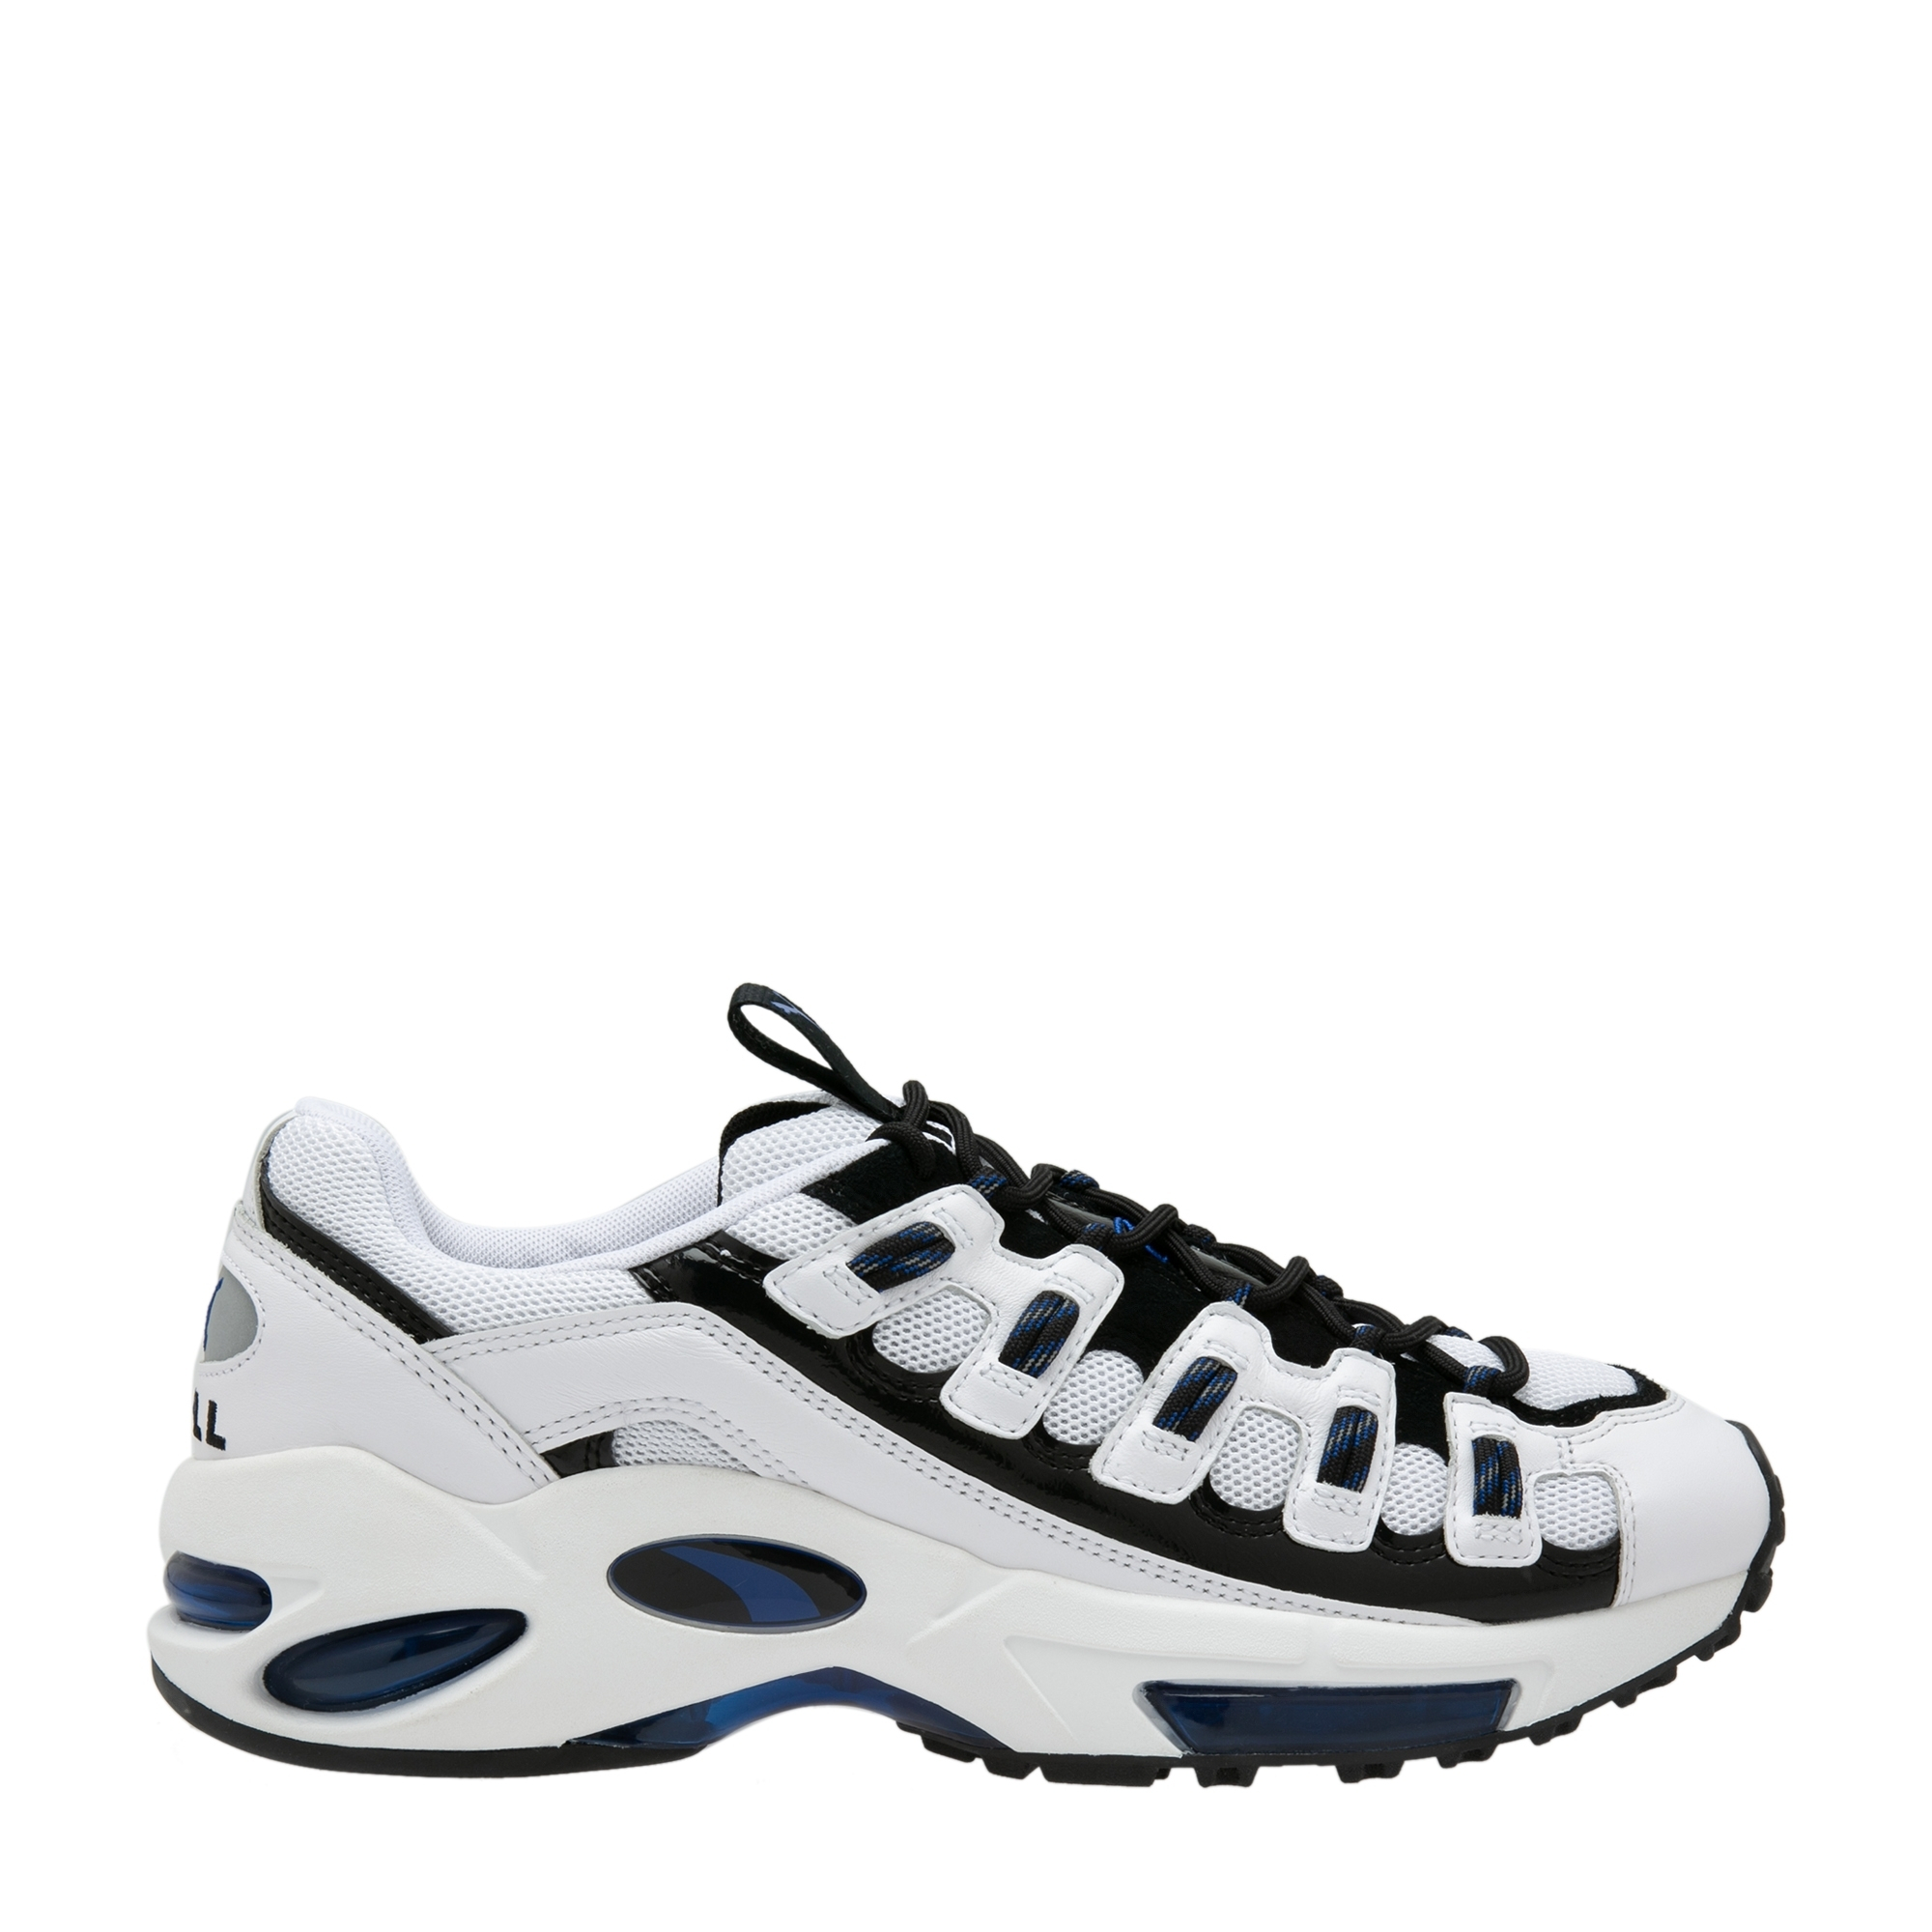 Cell Endura 'Patent 98' sneakers